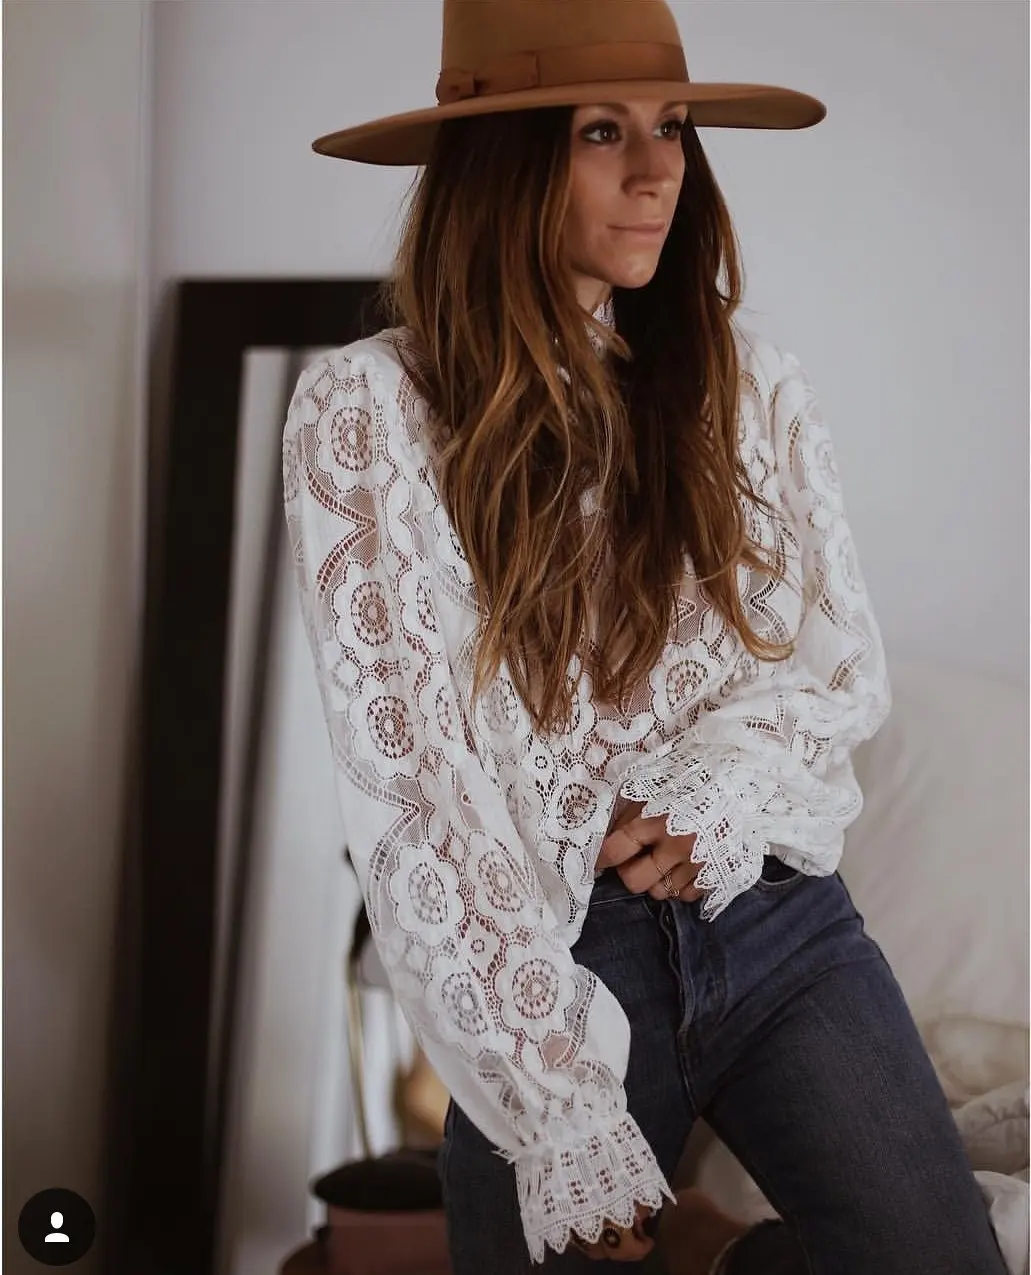 New White Black Women Tops Long Sleeve Hollow Lace Lady shirt Casual Tops Chiffon Blouse